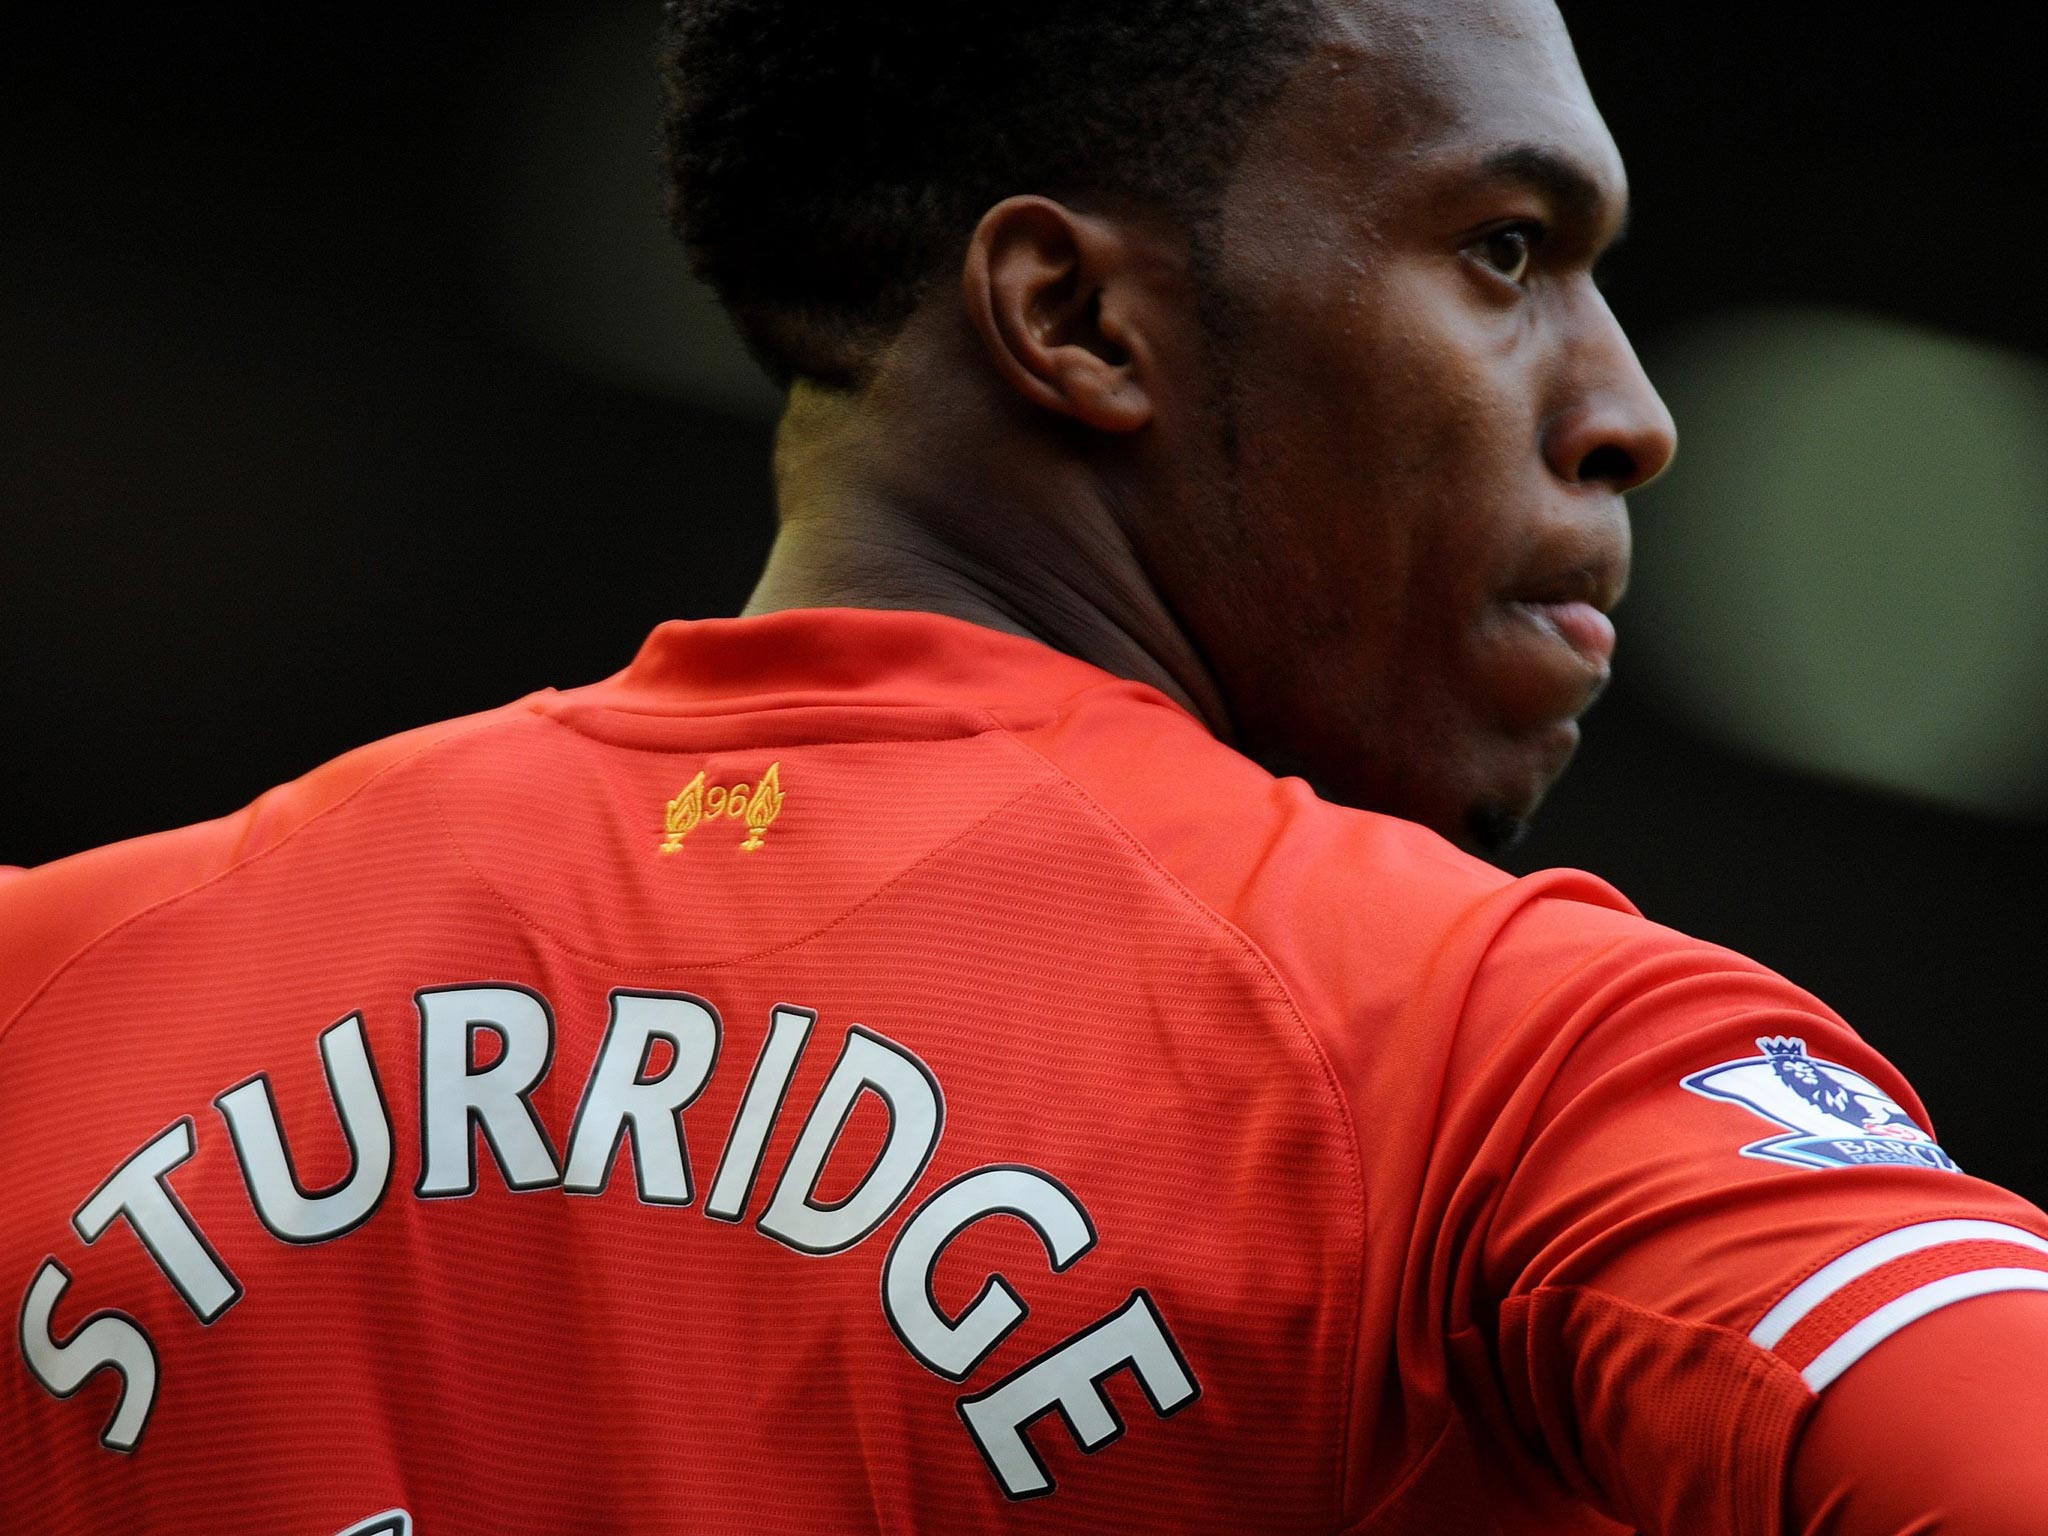 Daniel Sturridge will be assessed ahead of Liverpool's match at Crystal Palace